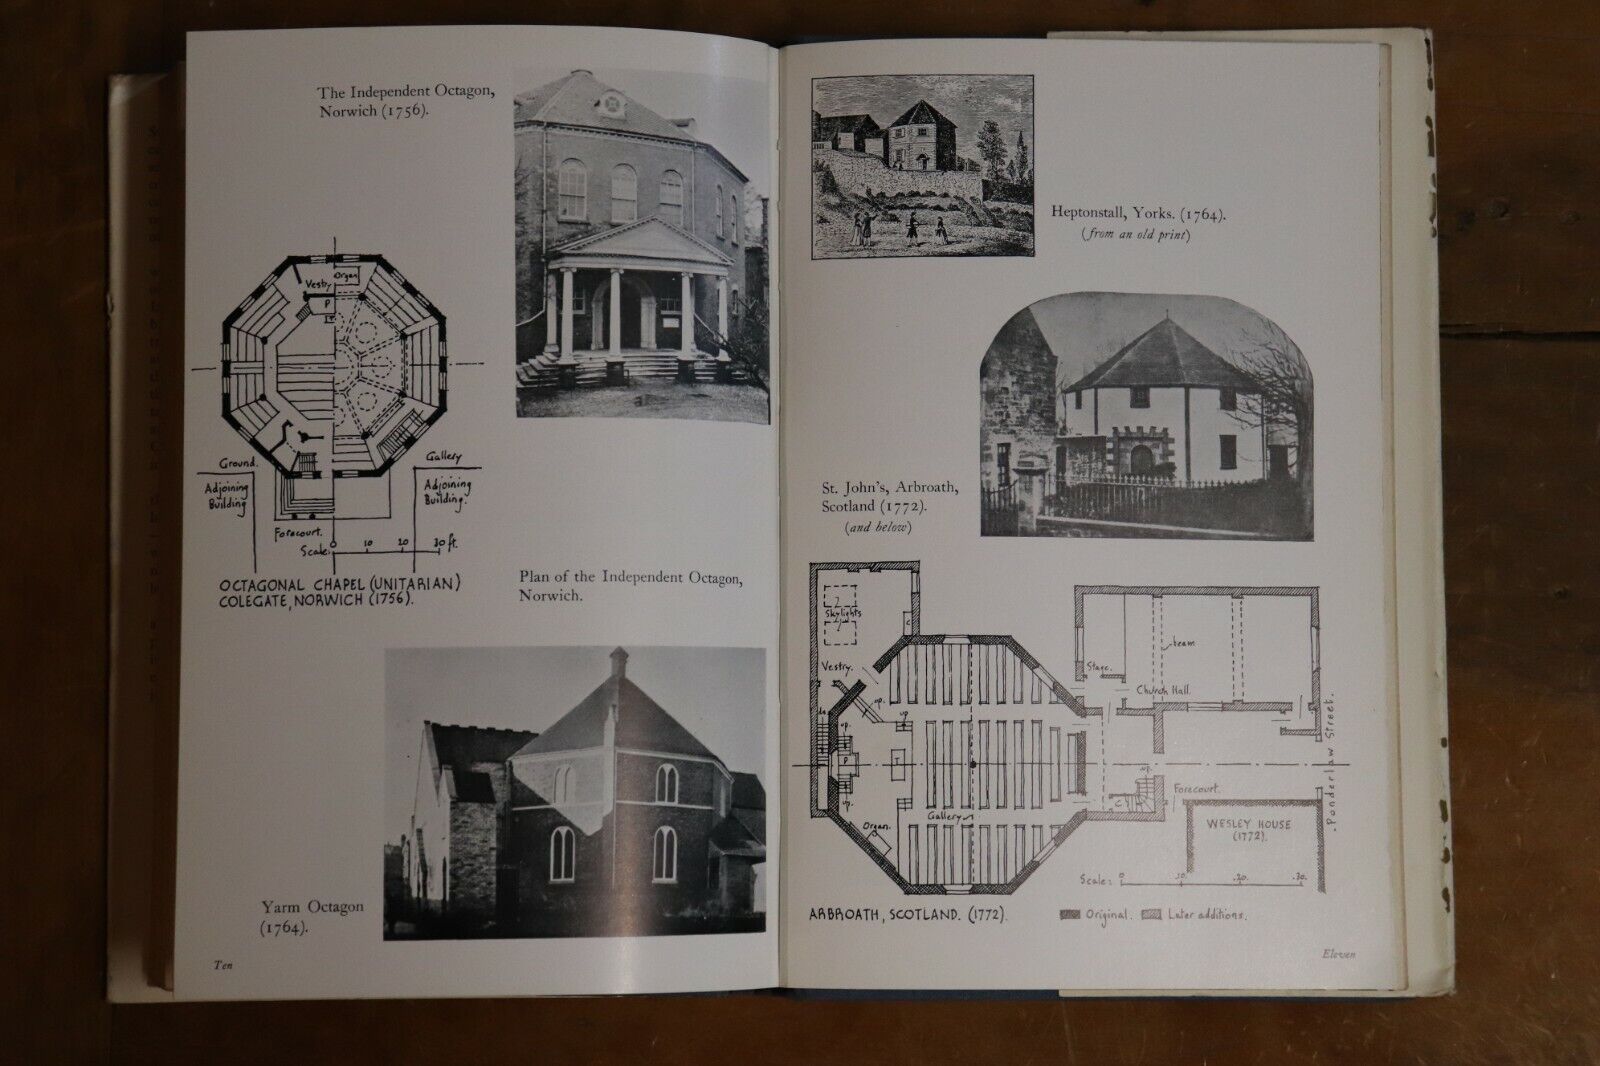 The Architectural Expression Of Methodism - 1964 - 1st Edition Architecture Book